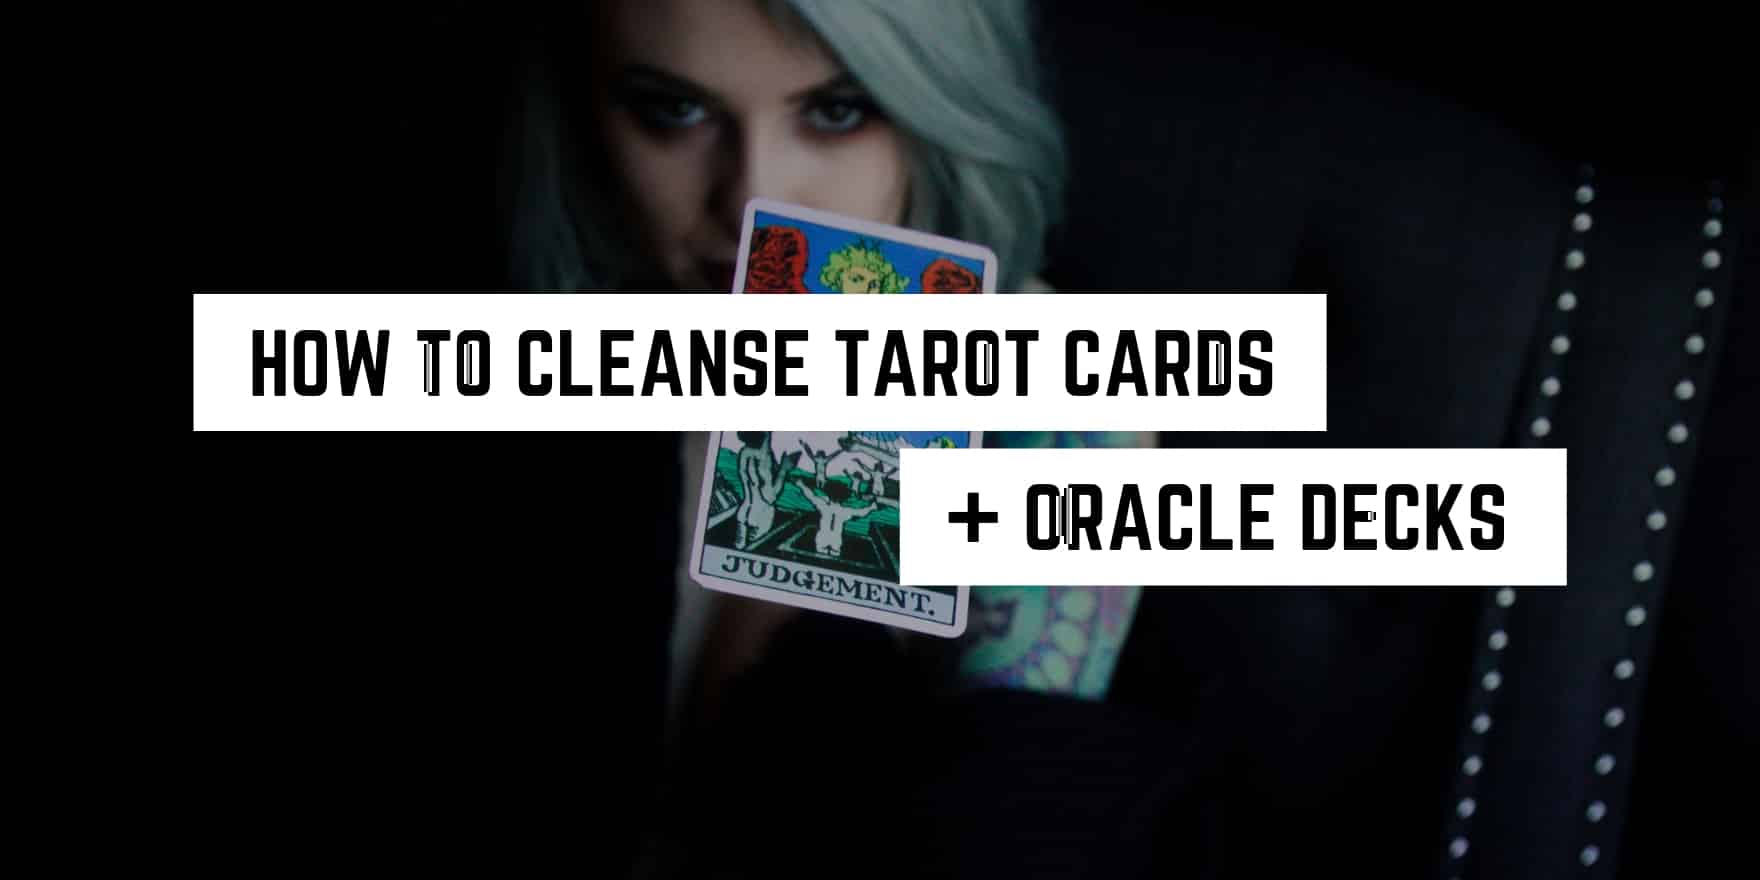 How to Cleanse Tarot Cards and Oracle Decks